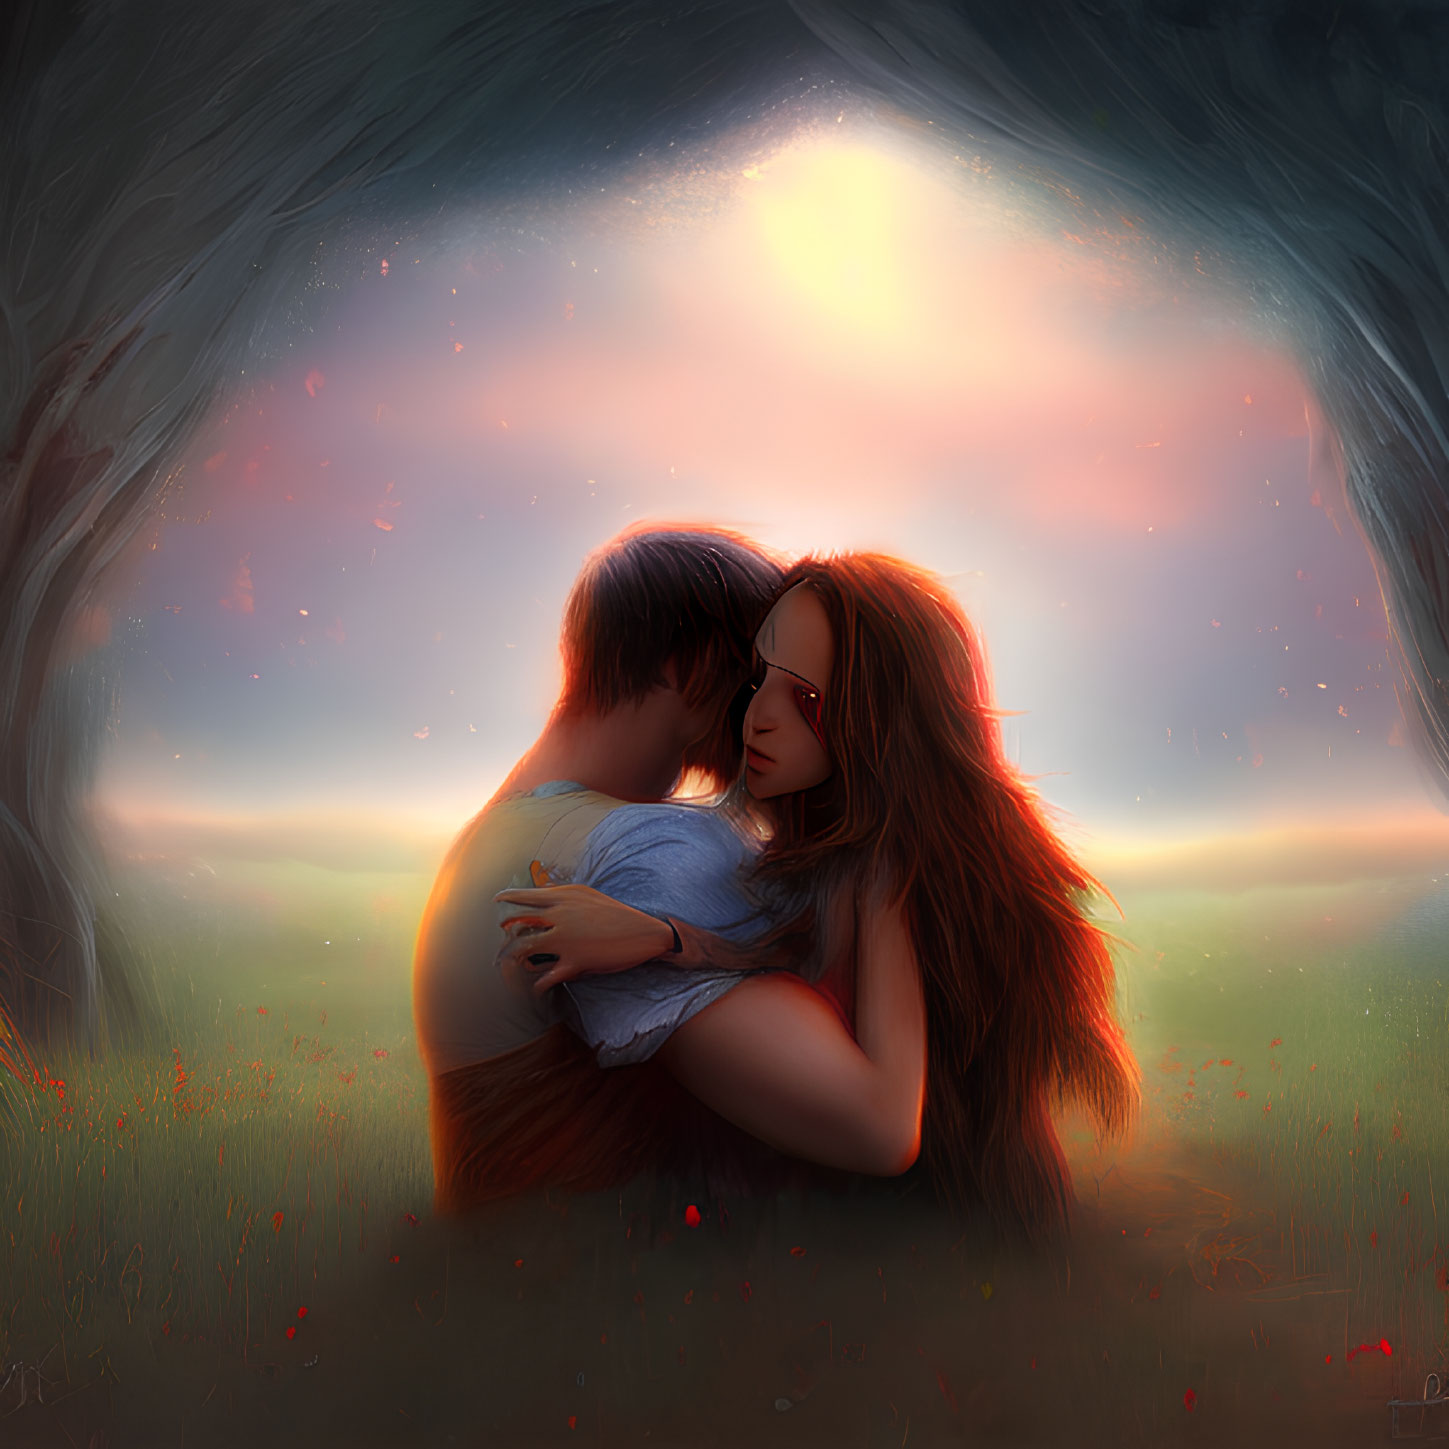 Romantic couple embracing under tree in dreamy landscape